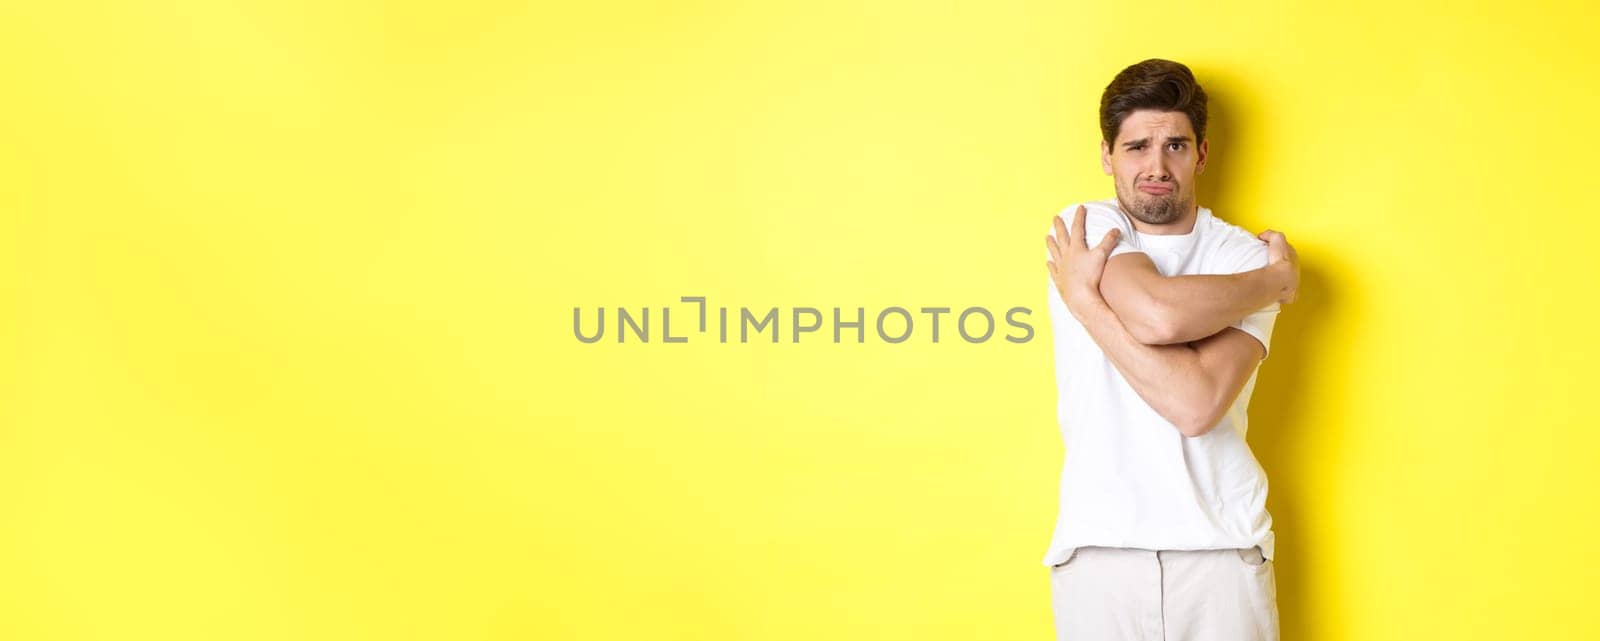 Silly and timid guy trying to comfort himself, hugging his body and frowning scared, standing over yellow background.